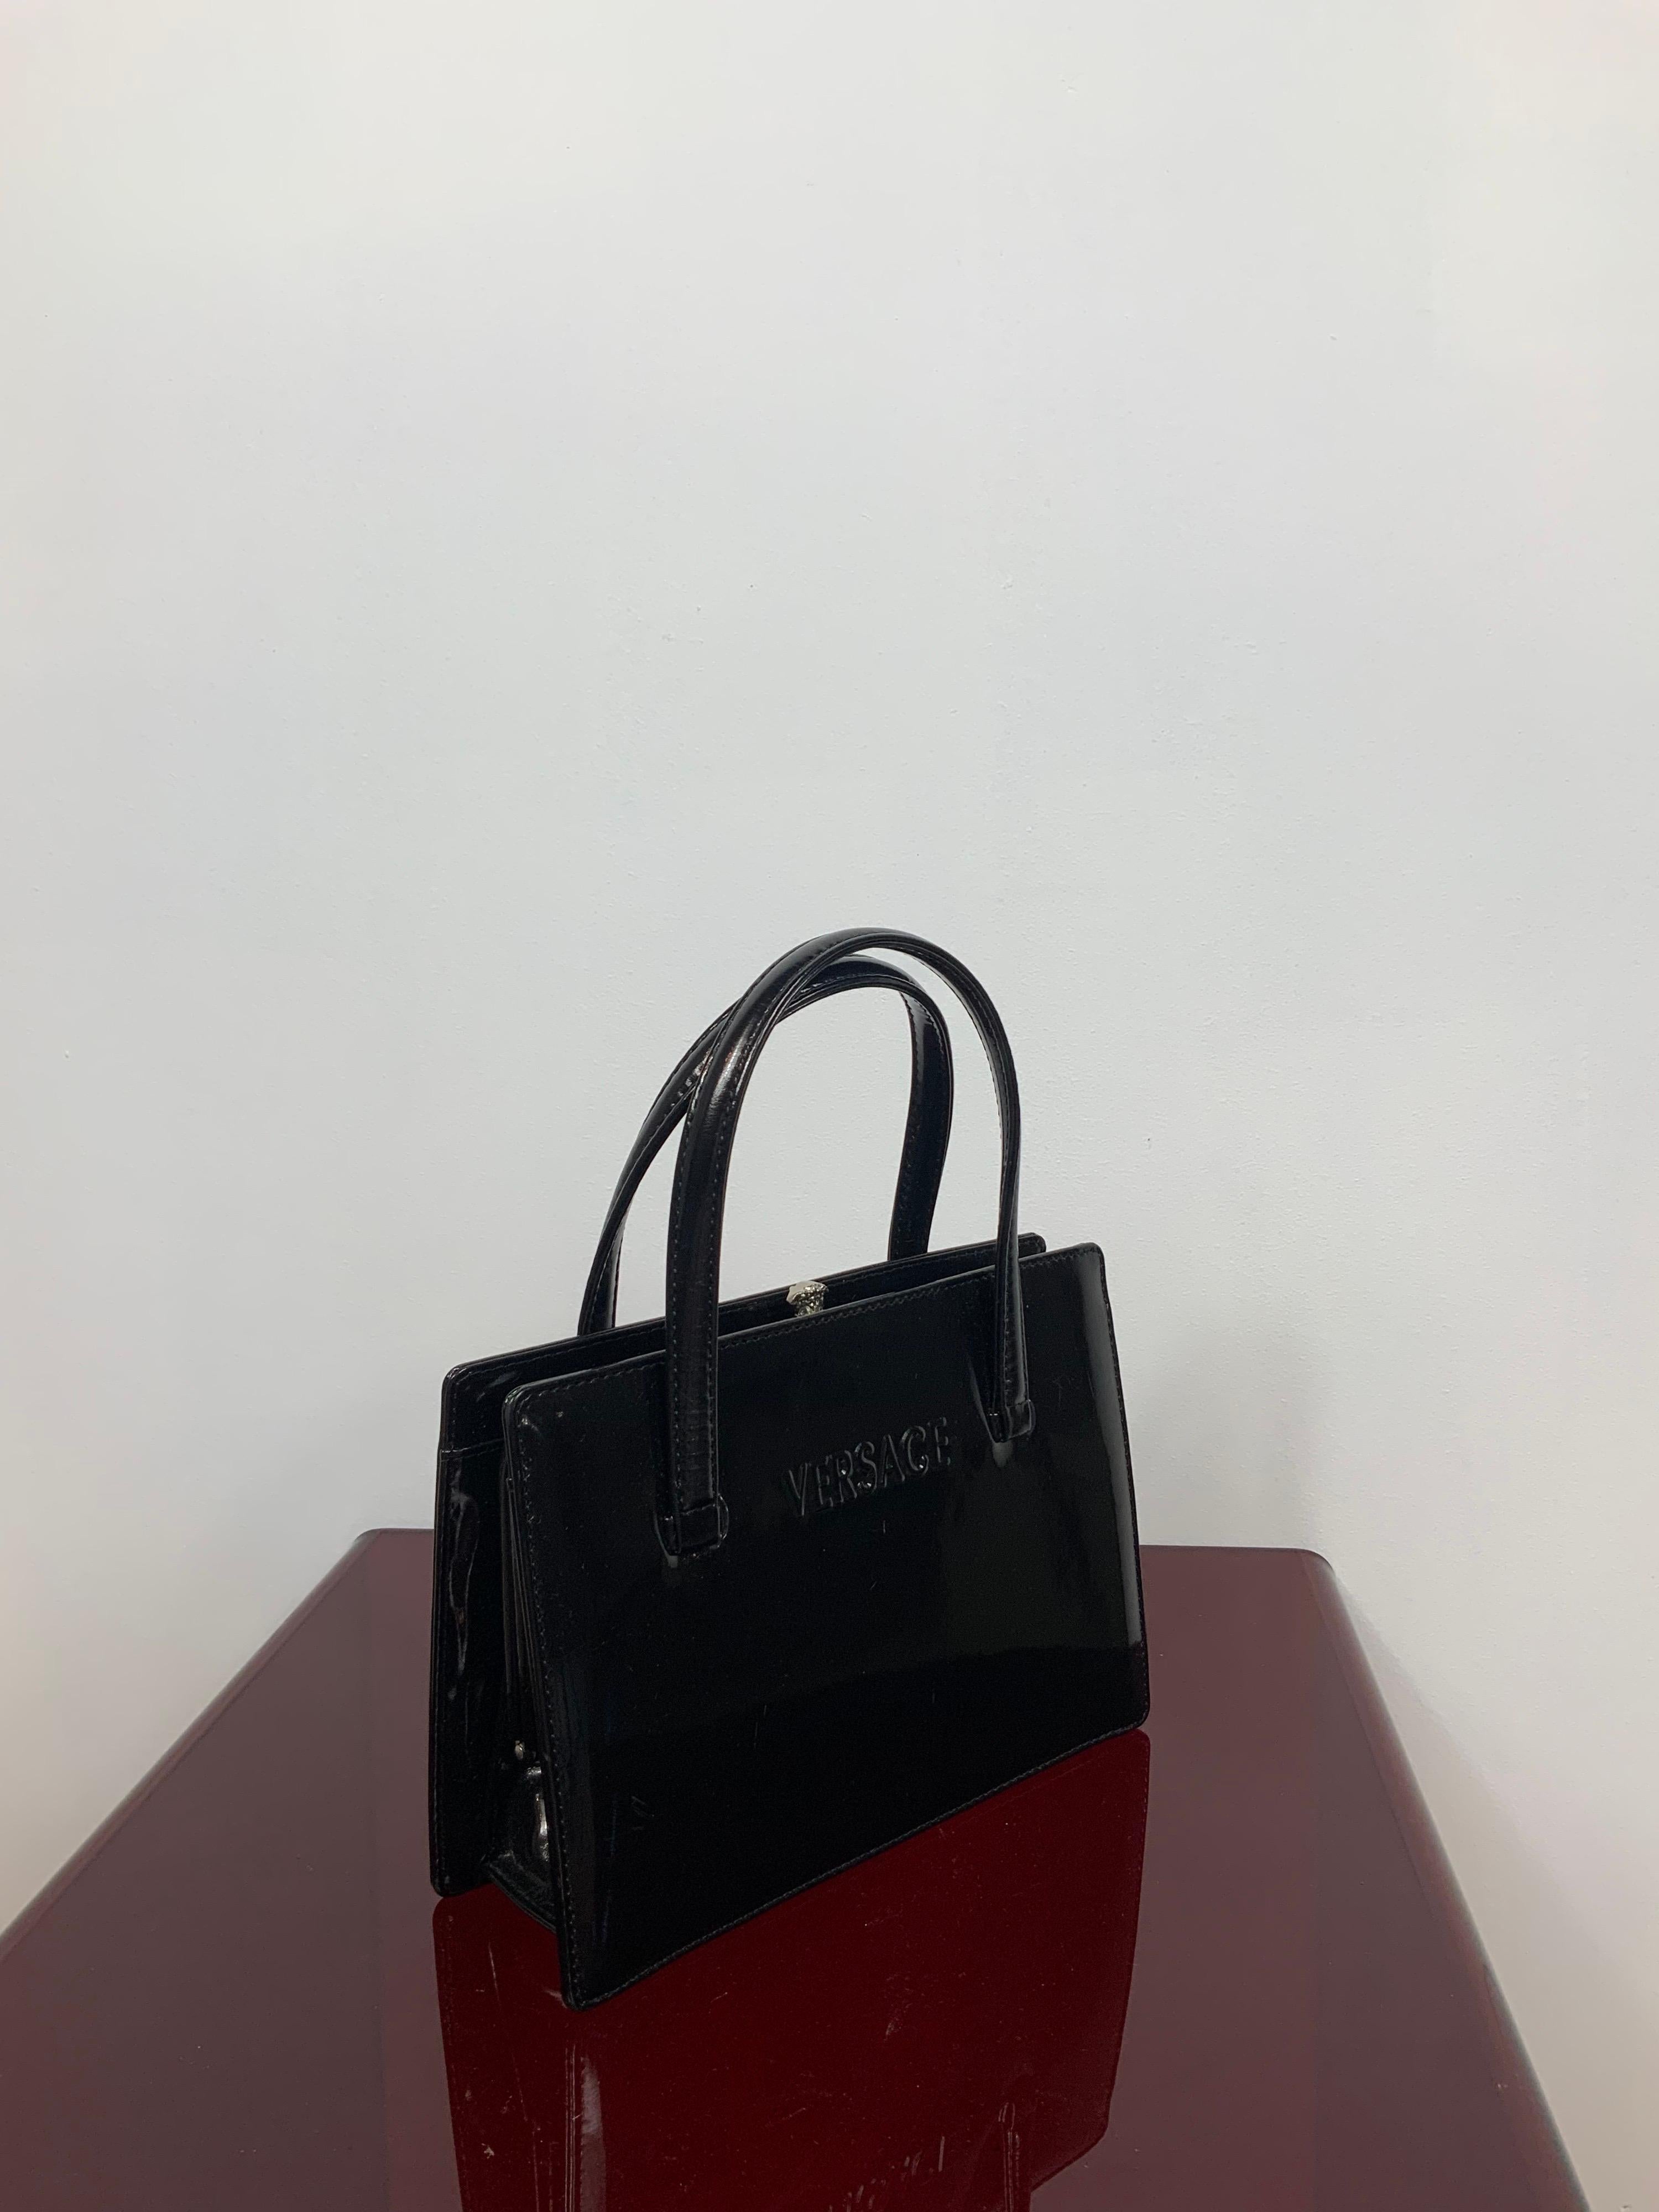 Gianni Versace patent leather bag  1